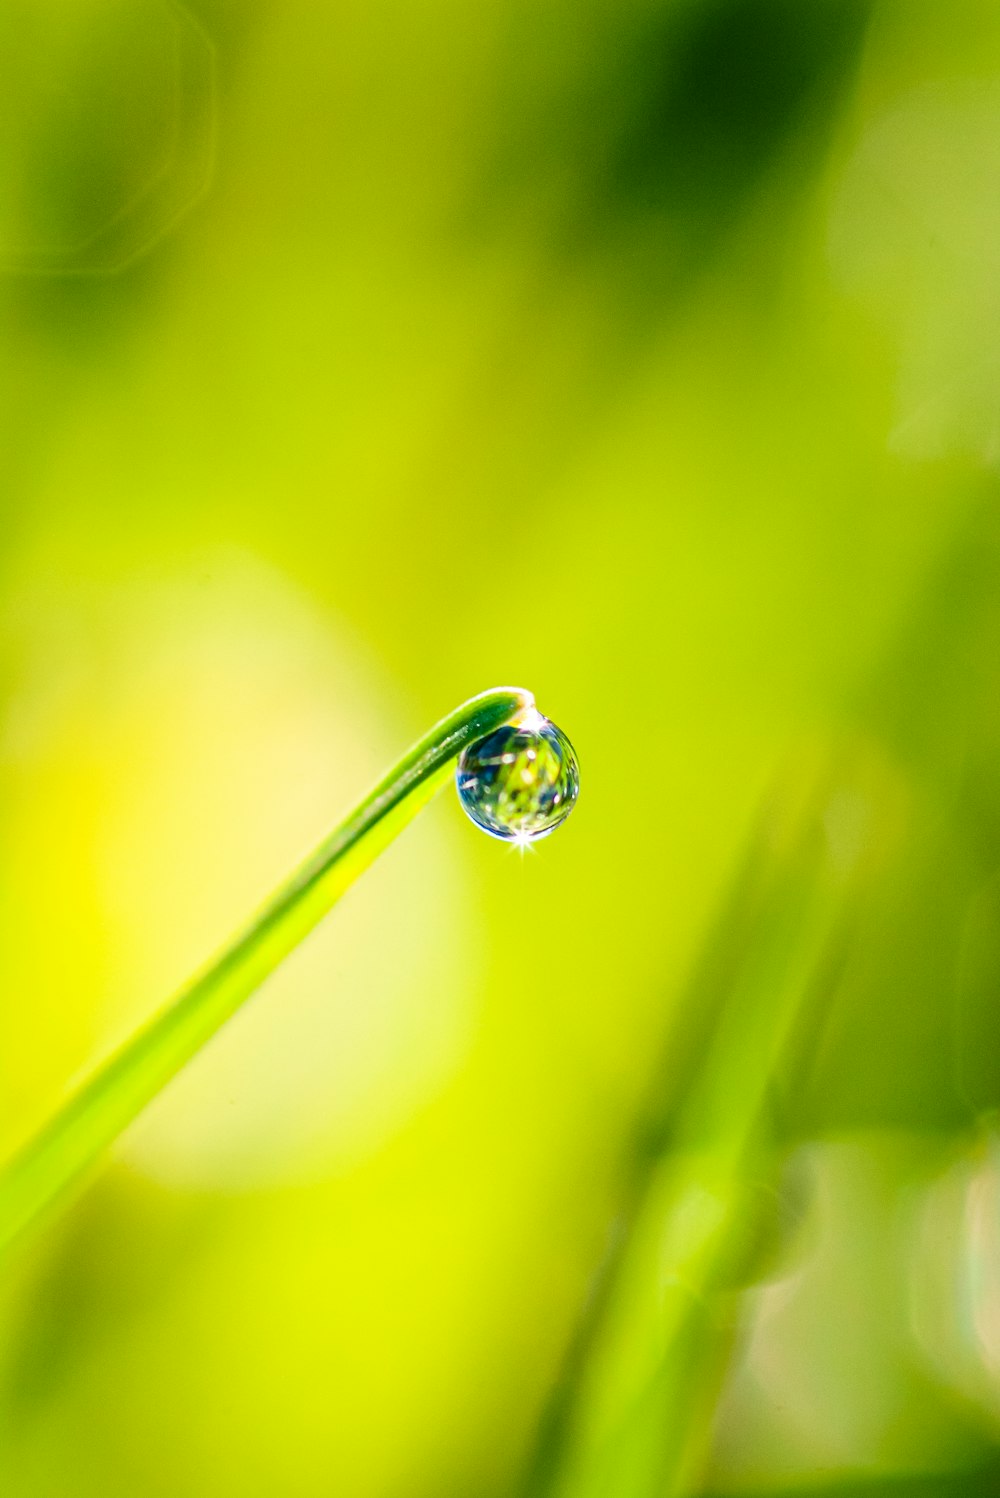 a drop of water sitting on top of a blade of grass